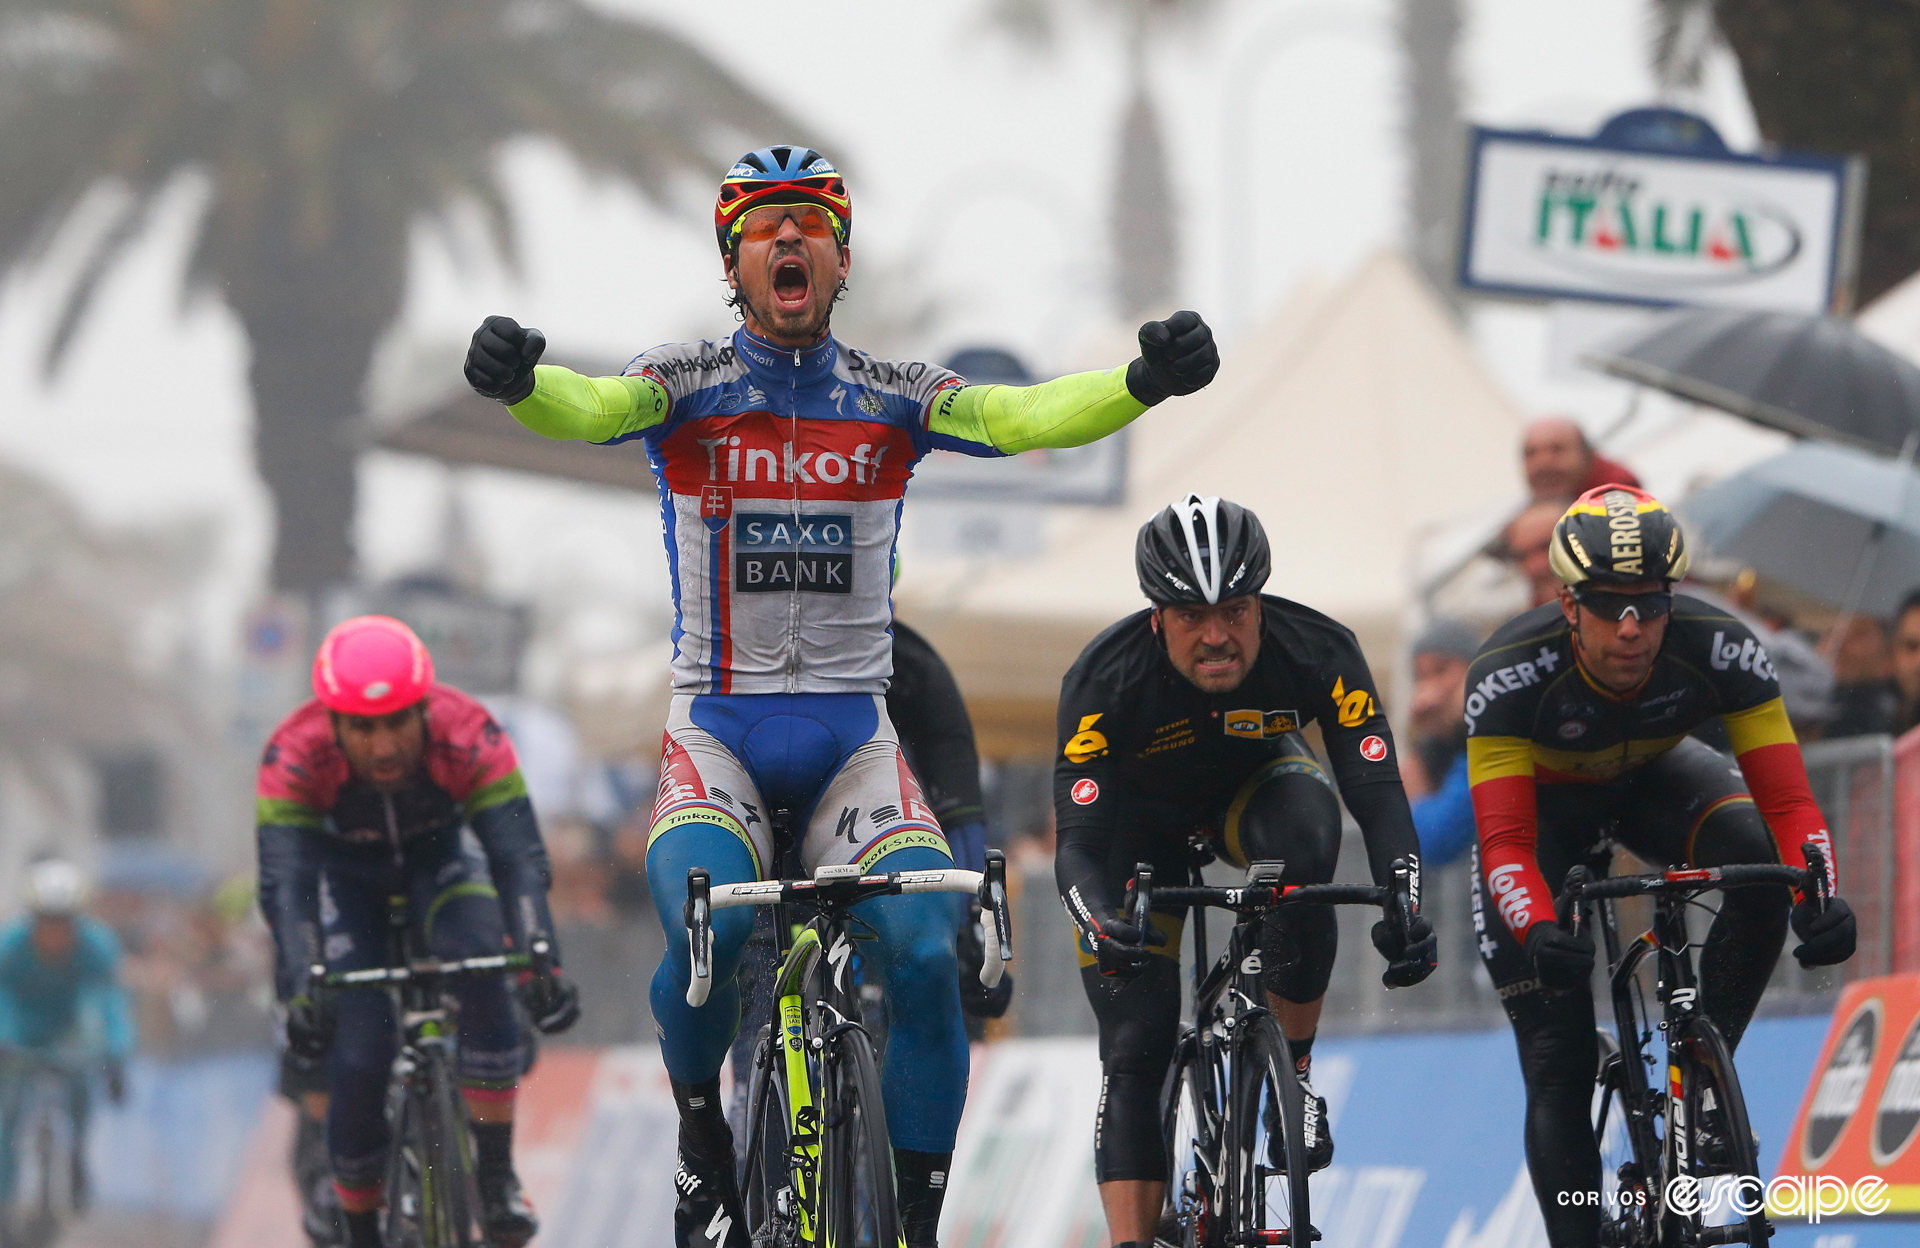 Peter Sagan celebrates winning a stage at the 2015 Tirreno-Adriatico, screaming in joy with arms in front of him, in the rain.